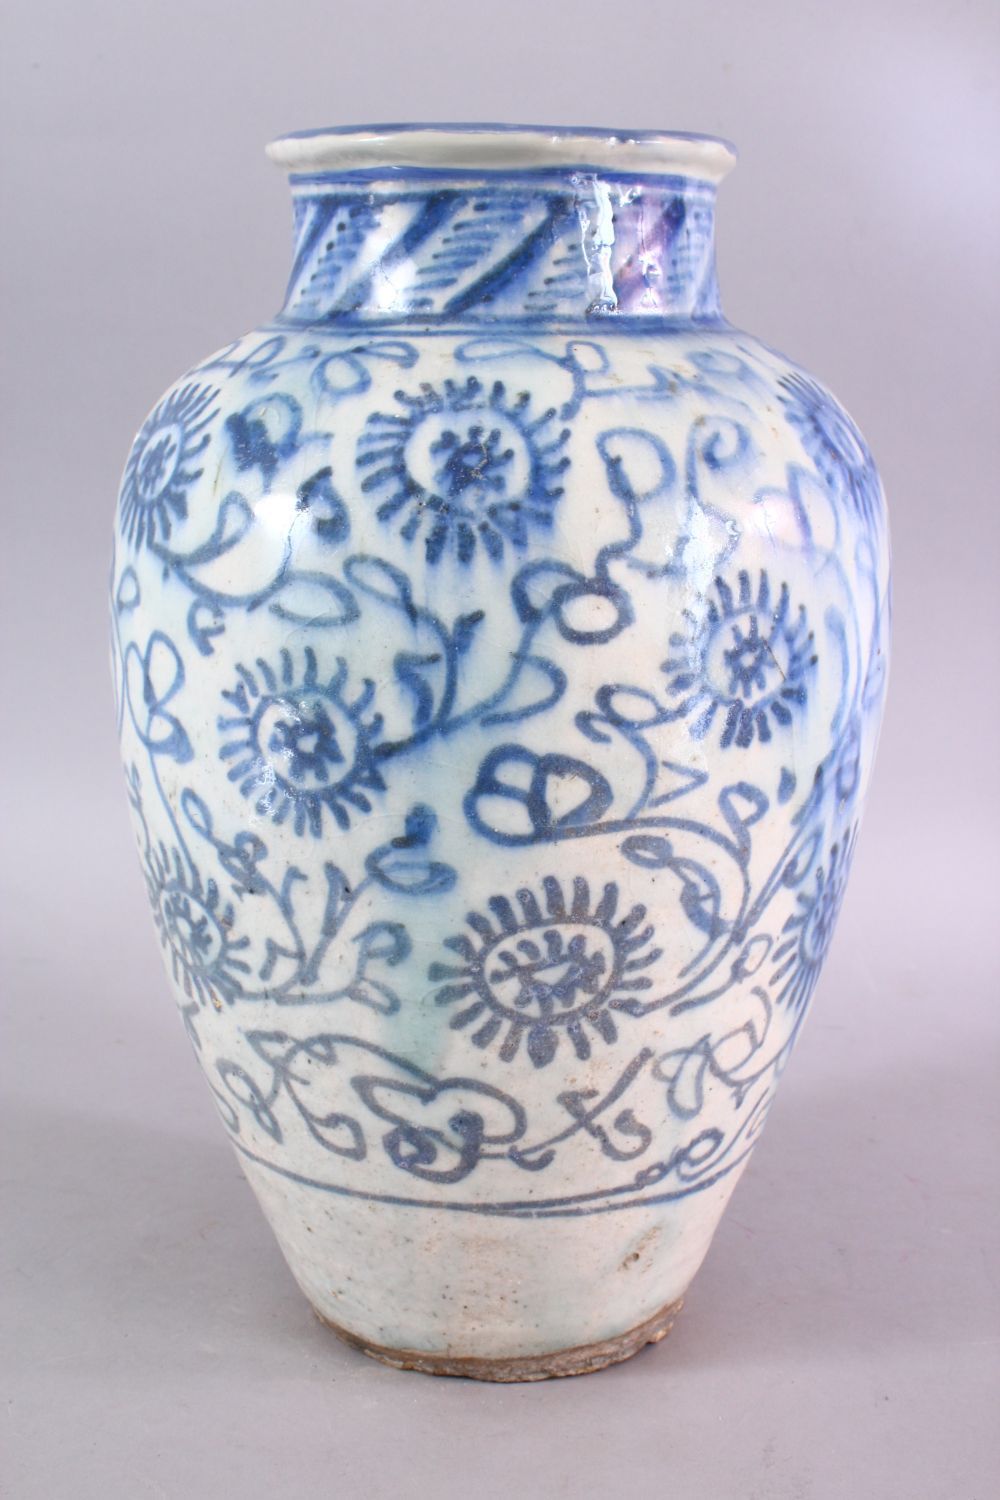 A LARGE 18TH CENTURY PERSIAN SAFAVID BLUE & WHITE GLAZED POTTERY VASE, the vase decorated with - Image 3 of 6